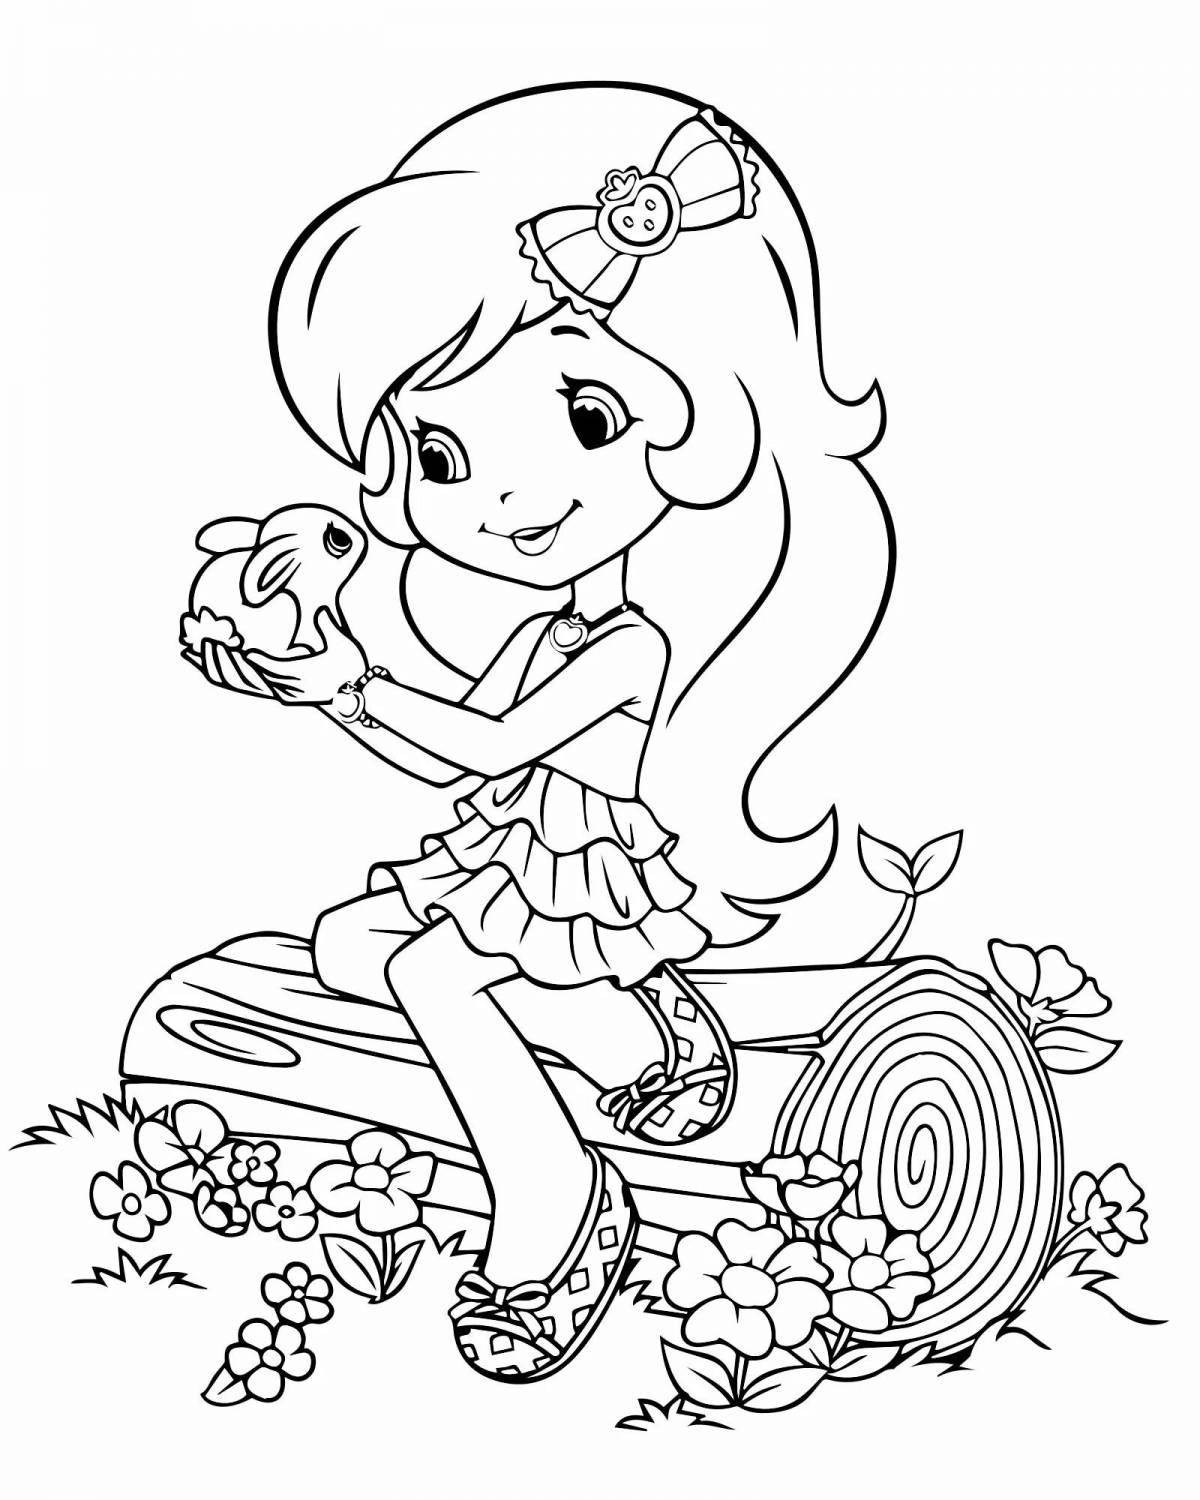 Cute coloring book for 6 year old girls